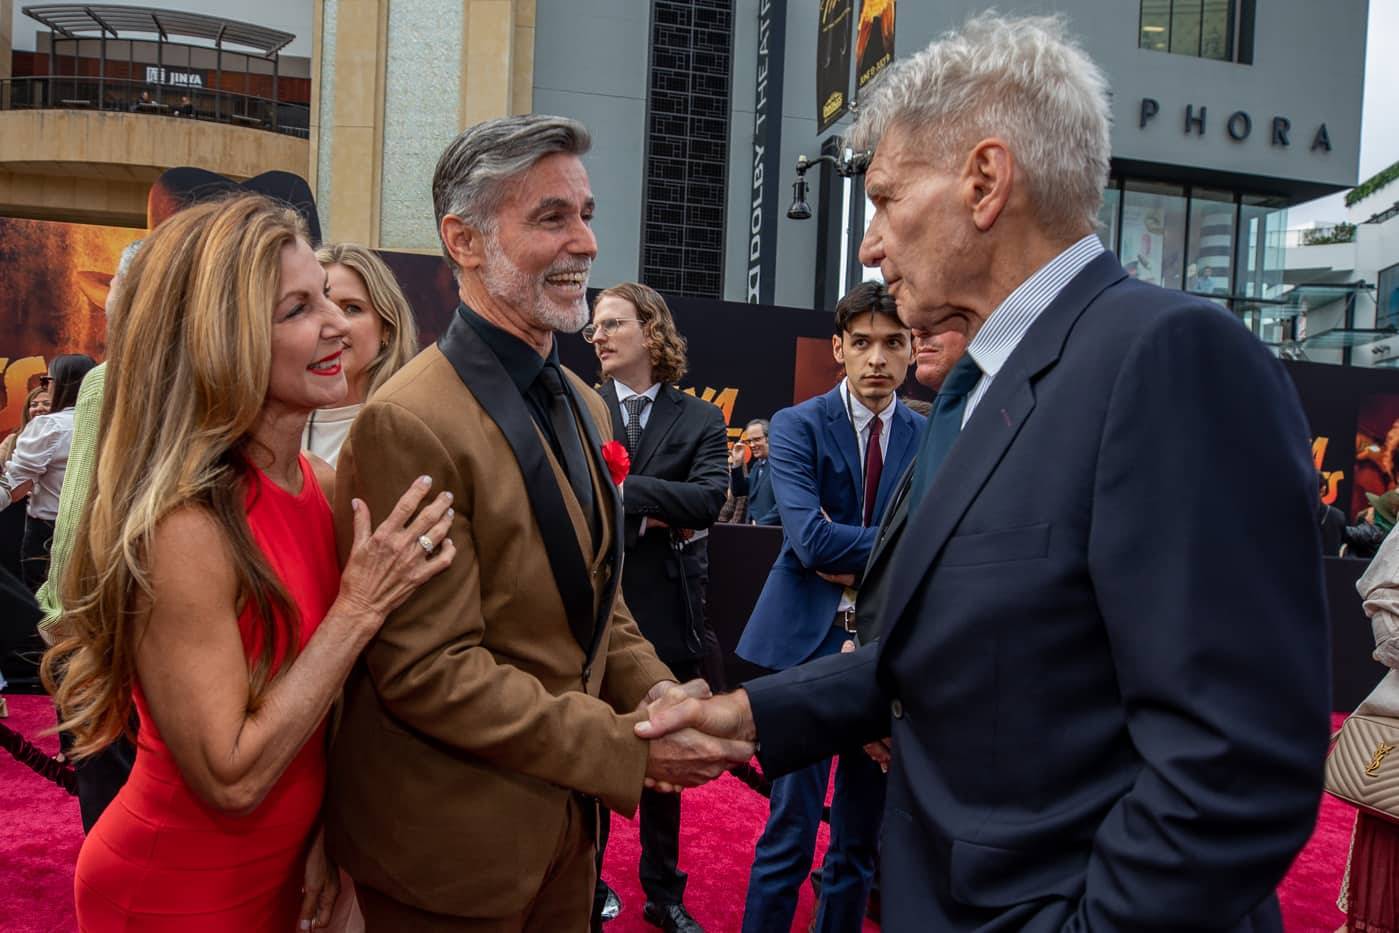 Disney Cast Members Join Harrison Ford at 'Indiana Jones and The Dial of Destiny' Premiere